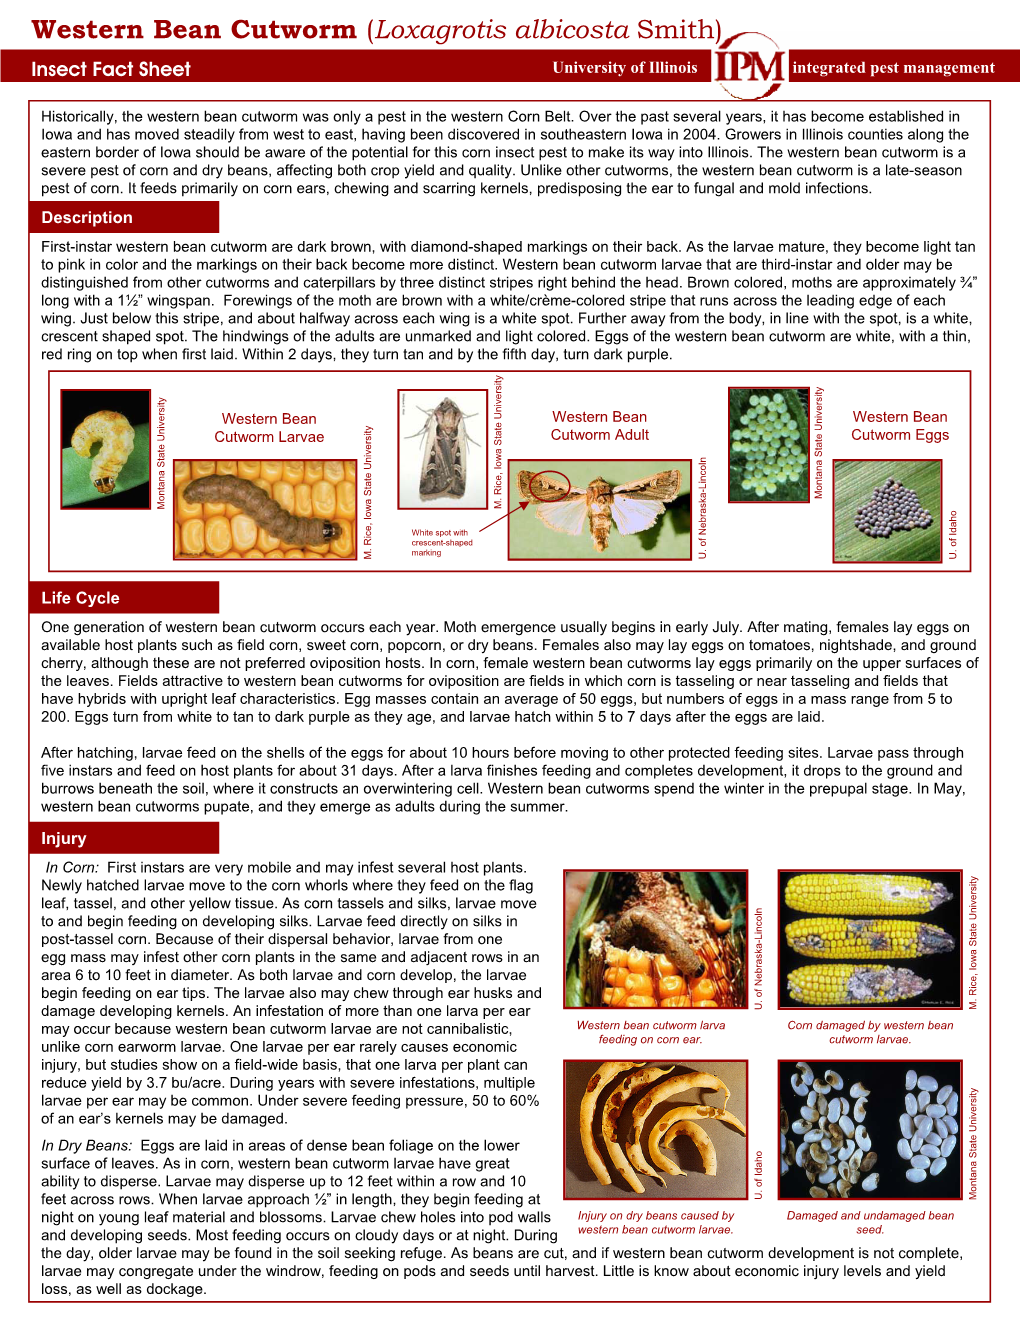 Western Bean Cutworm (Loxagrotis Albicosta Smith) Insect Fact Sheet University of Illinois Integrated Pest Management